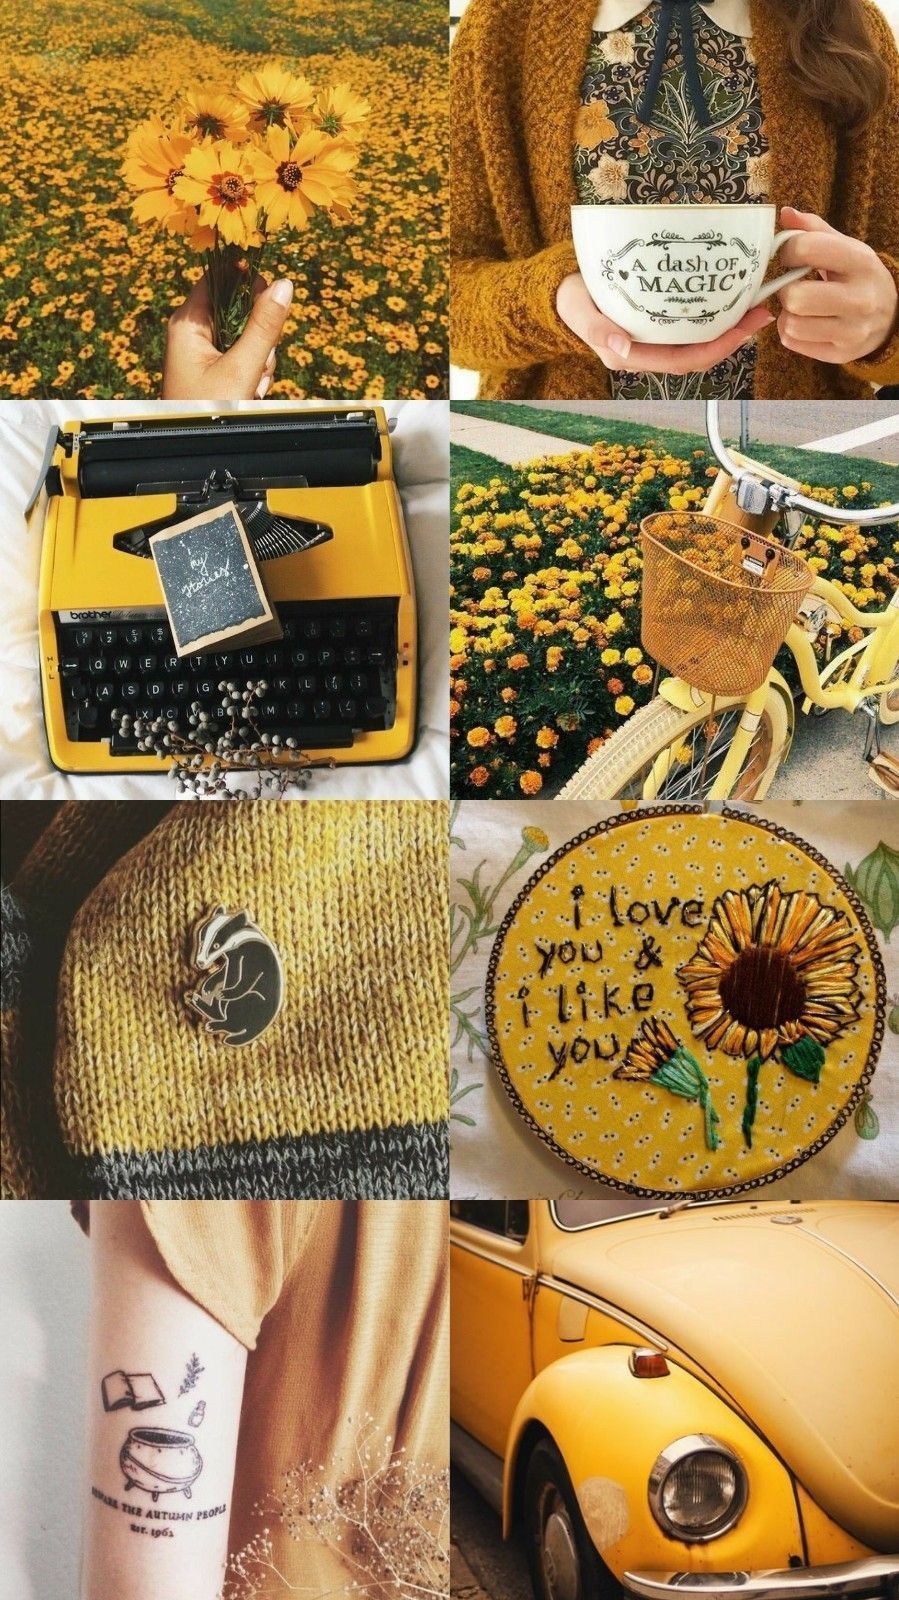 A collage of four different pictures. The top left picture is of a girl holding a daisy, the top right picture is of a girl holding a mug with the words 